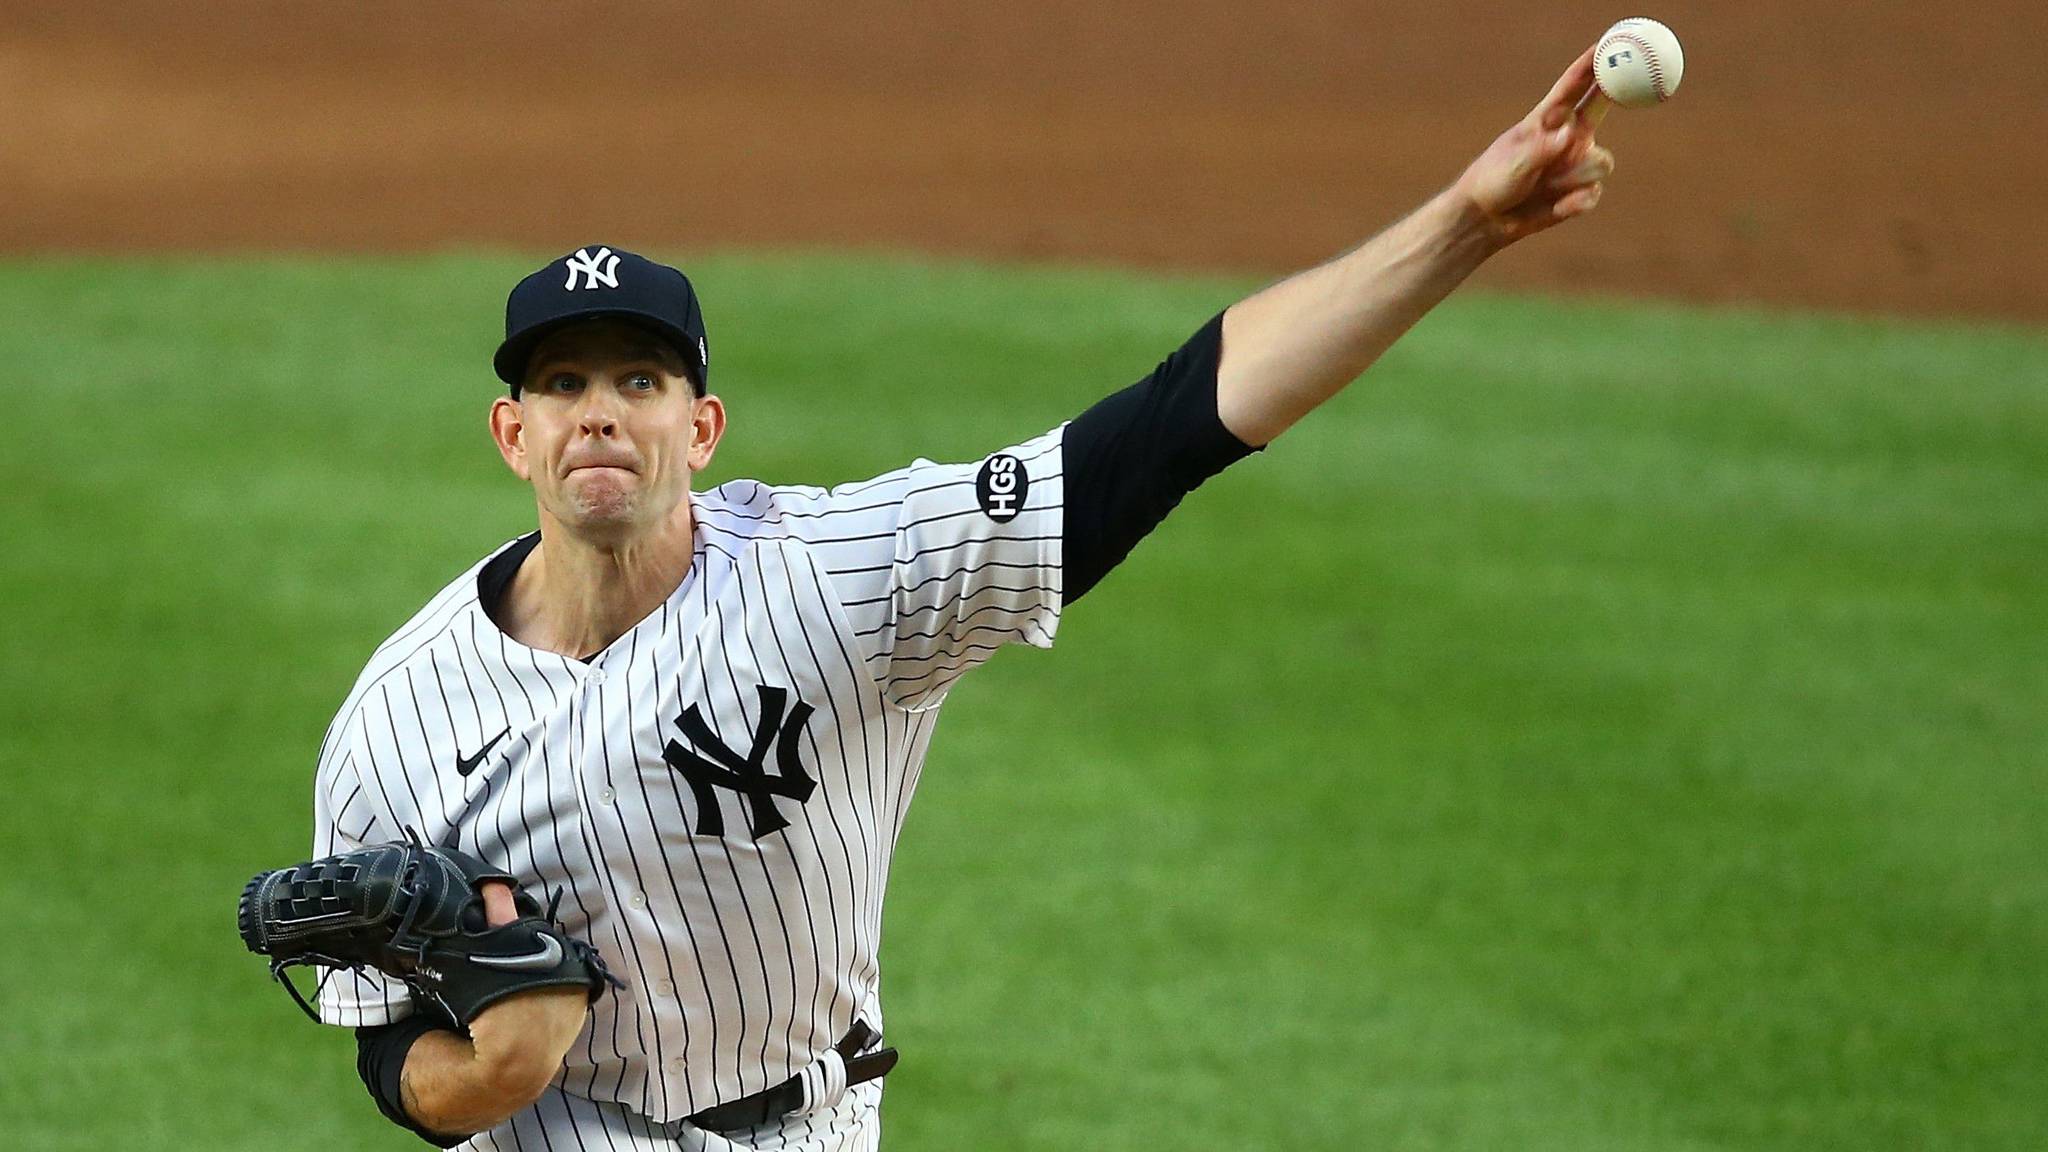 Mike Stobe / Getty Images 
After a stint with the New York Yankees, James Paxton returns to the organization that drafted, developed and helped him have his first MLB success. Paxton took less money to return this season to Seattle on a one-year contract.